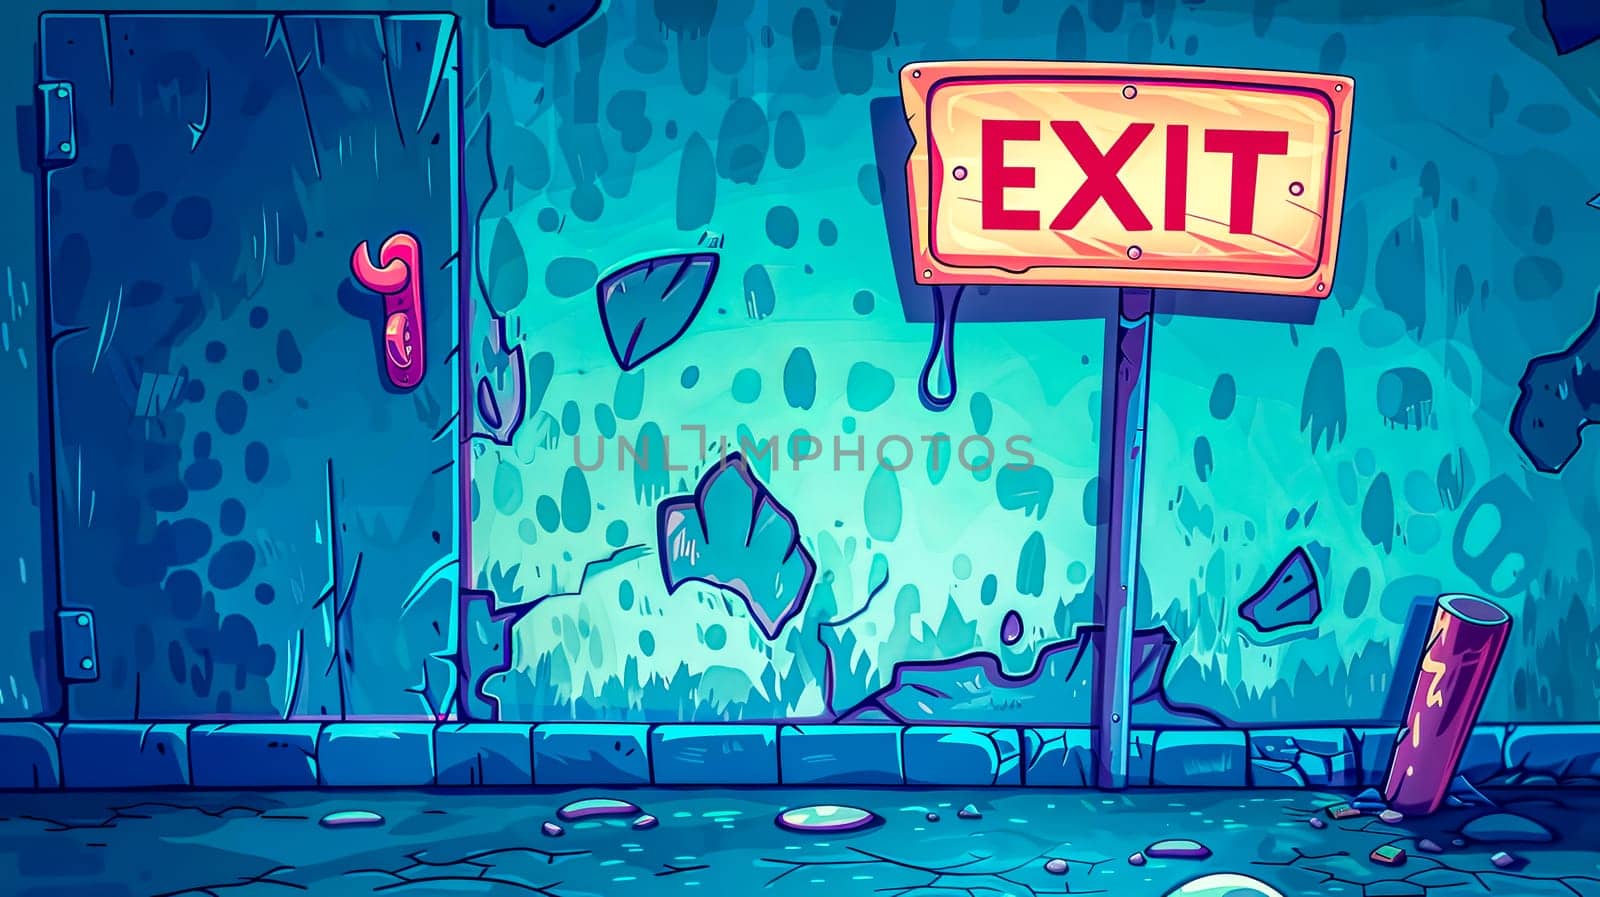 Surreal exit sign in colorful cartoon alleyway by Edophoto